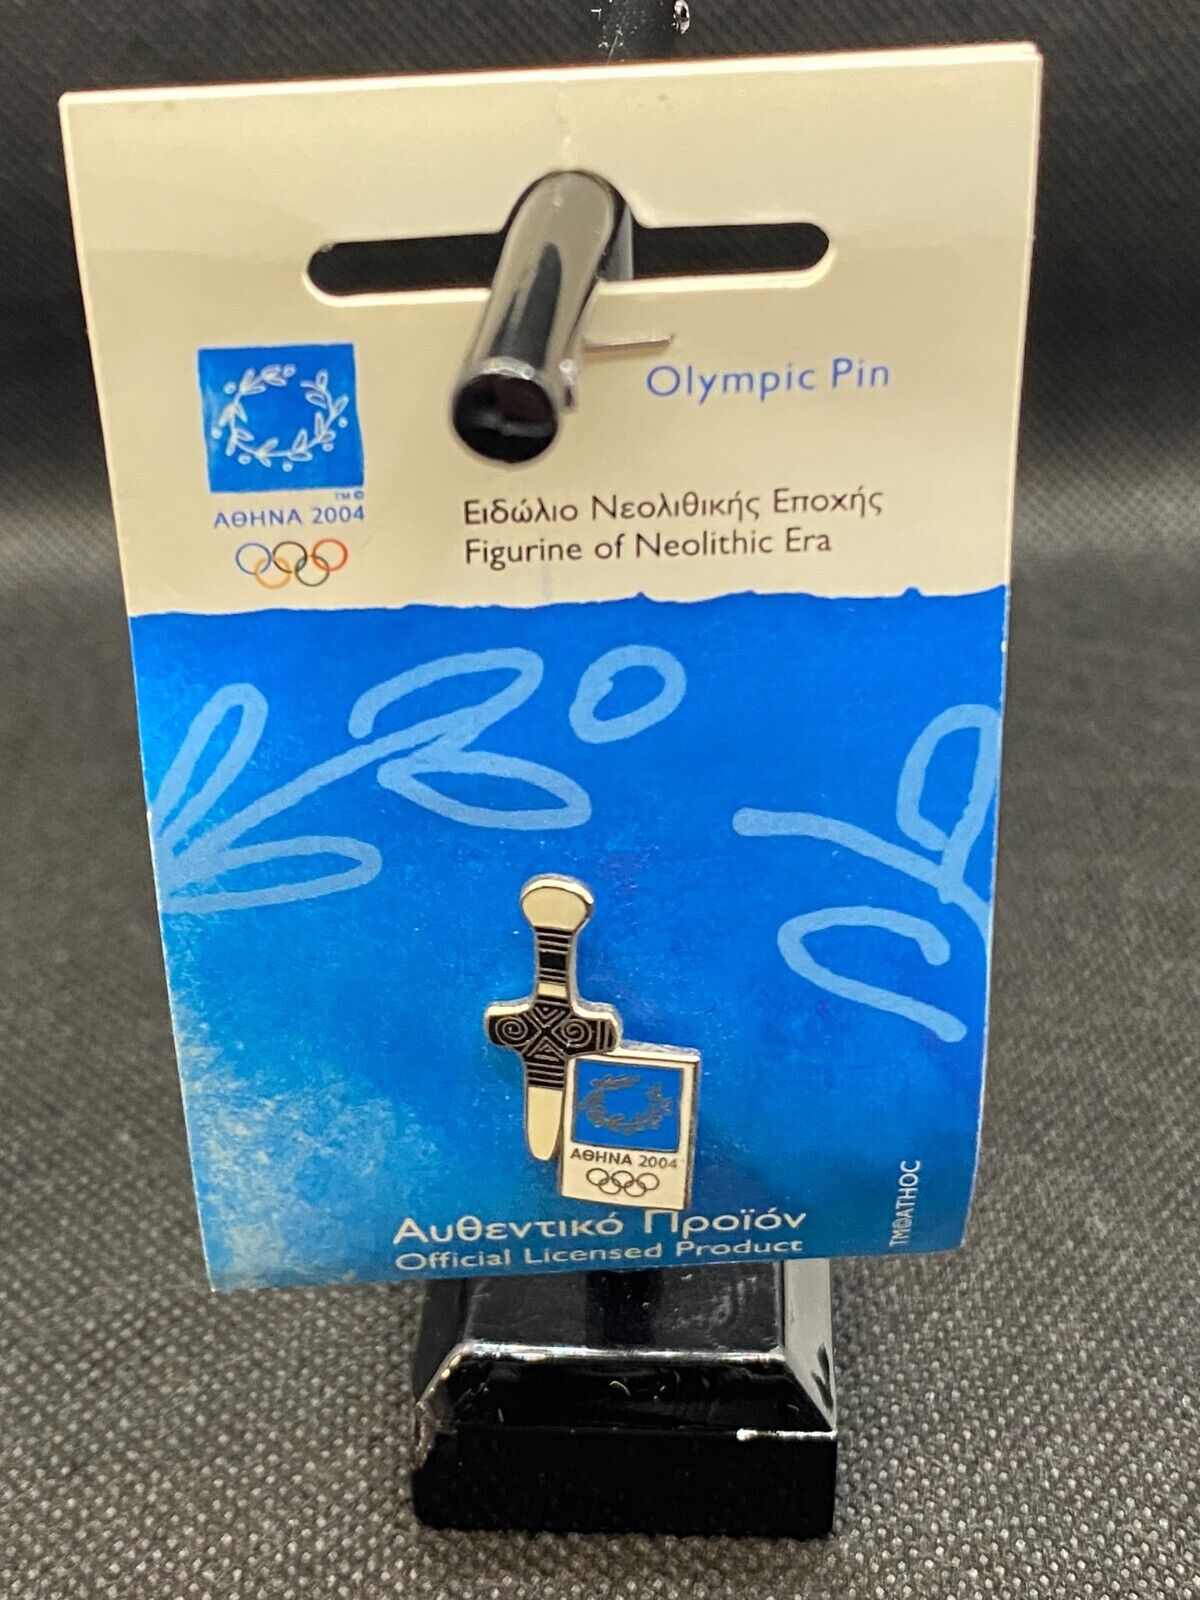 2004 Athens Olympic Pin with Neolithic Era figurine - Original Packaging - NEW